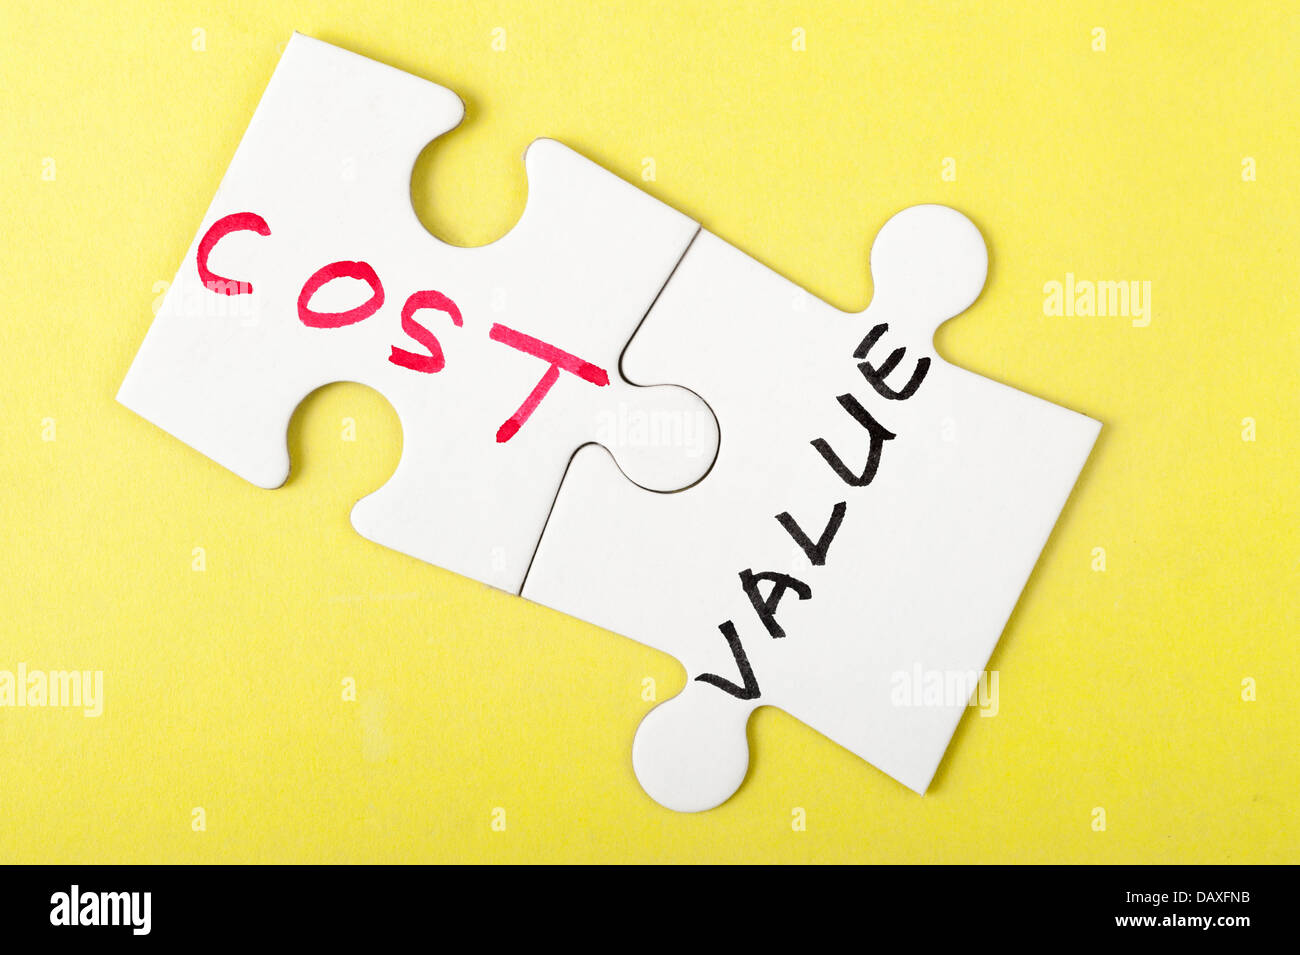 Cost and value words written on two pieces of puzzle Stock Photo - Alamy